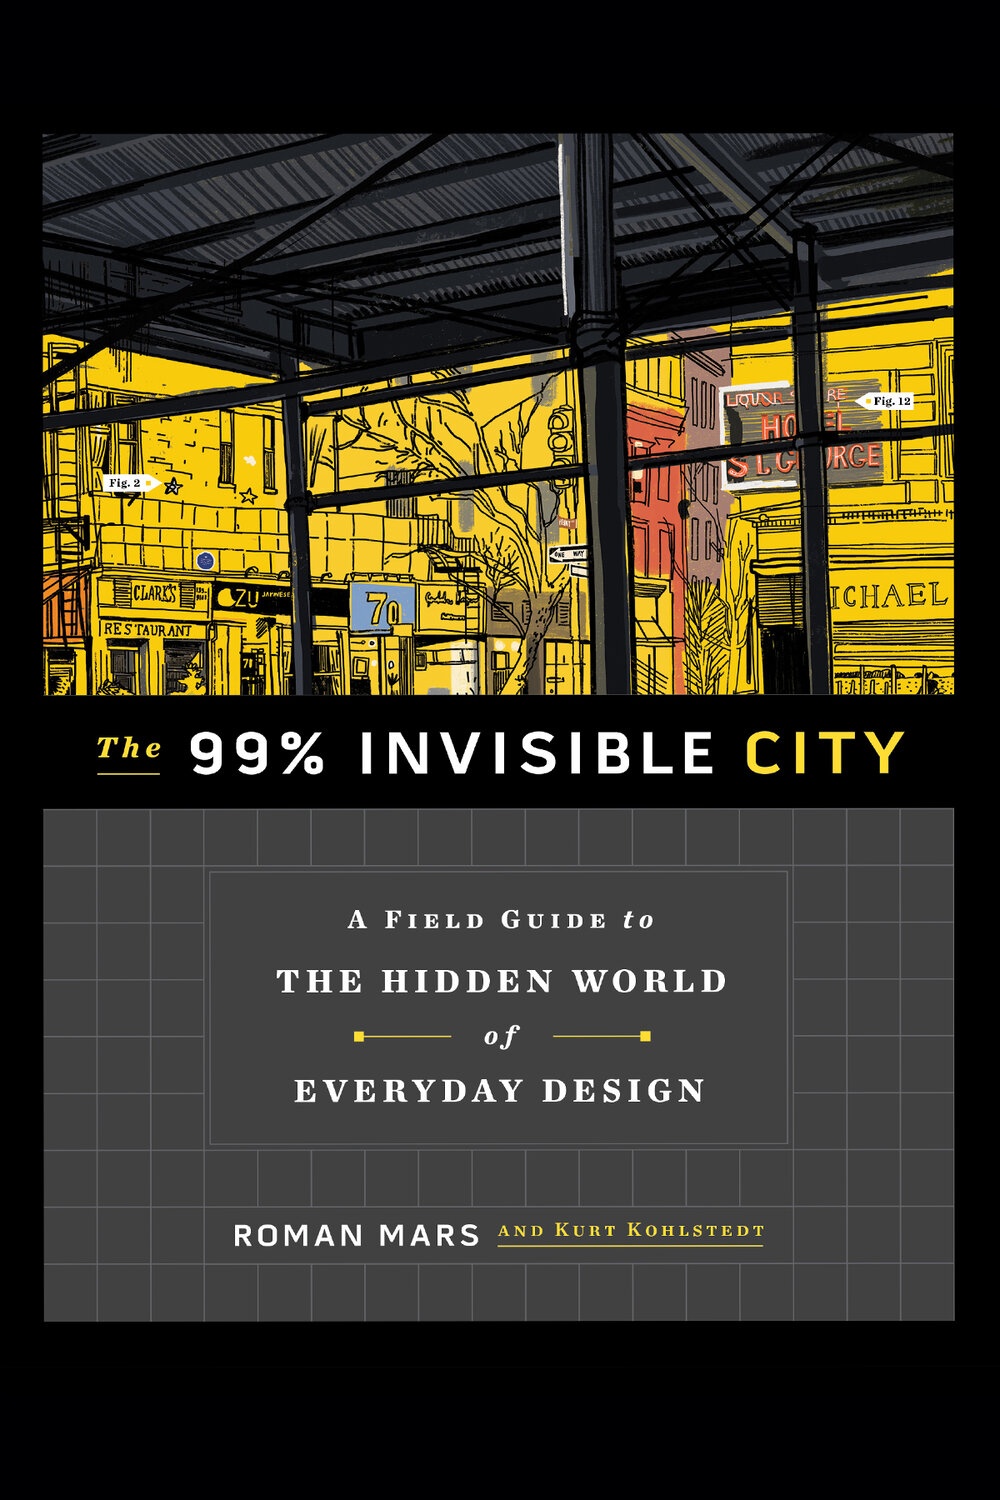 The 99% Invisible City: A Field Guide to The Hidden World of Everyday Design by Roman Mars and Kurt Kohlstedt